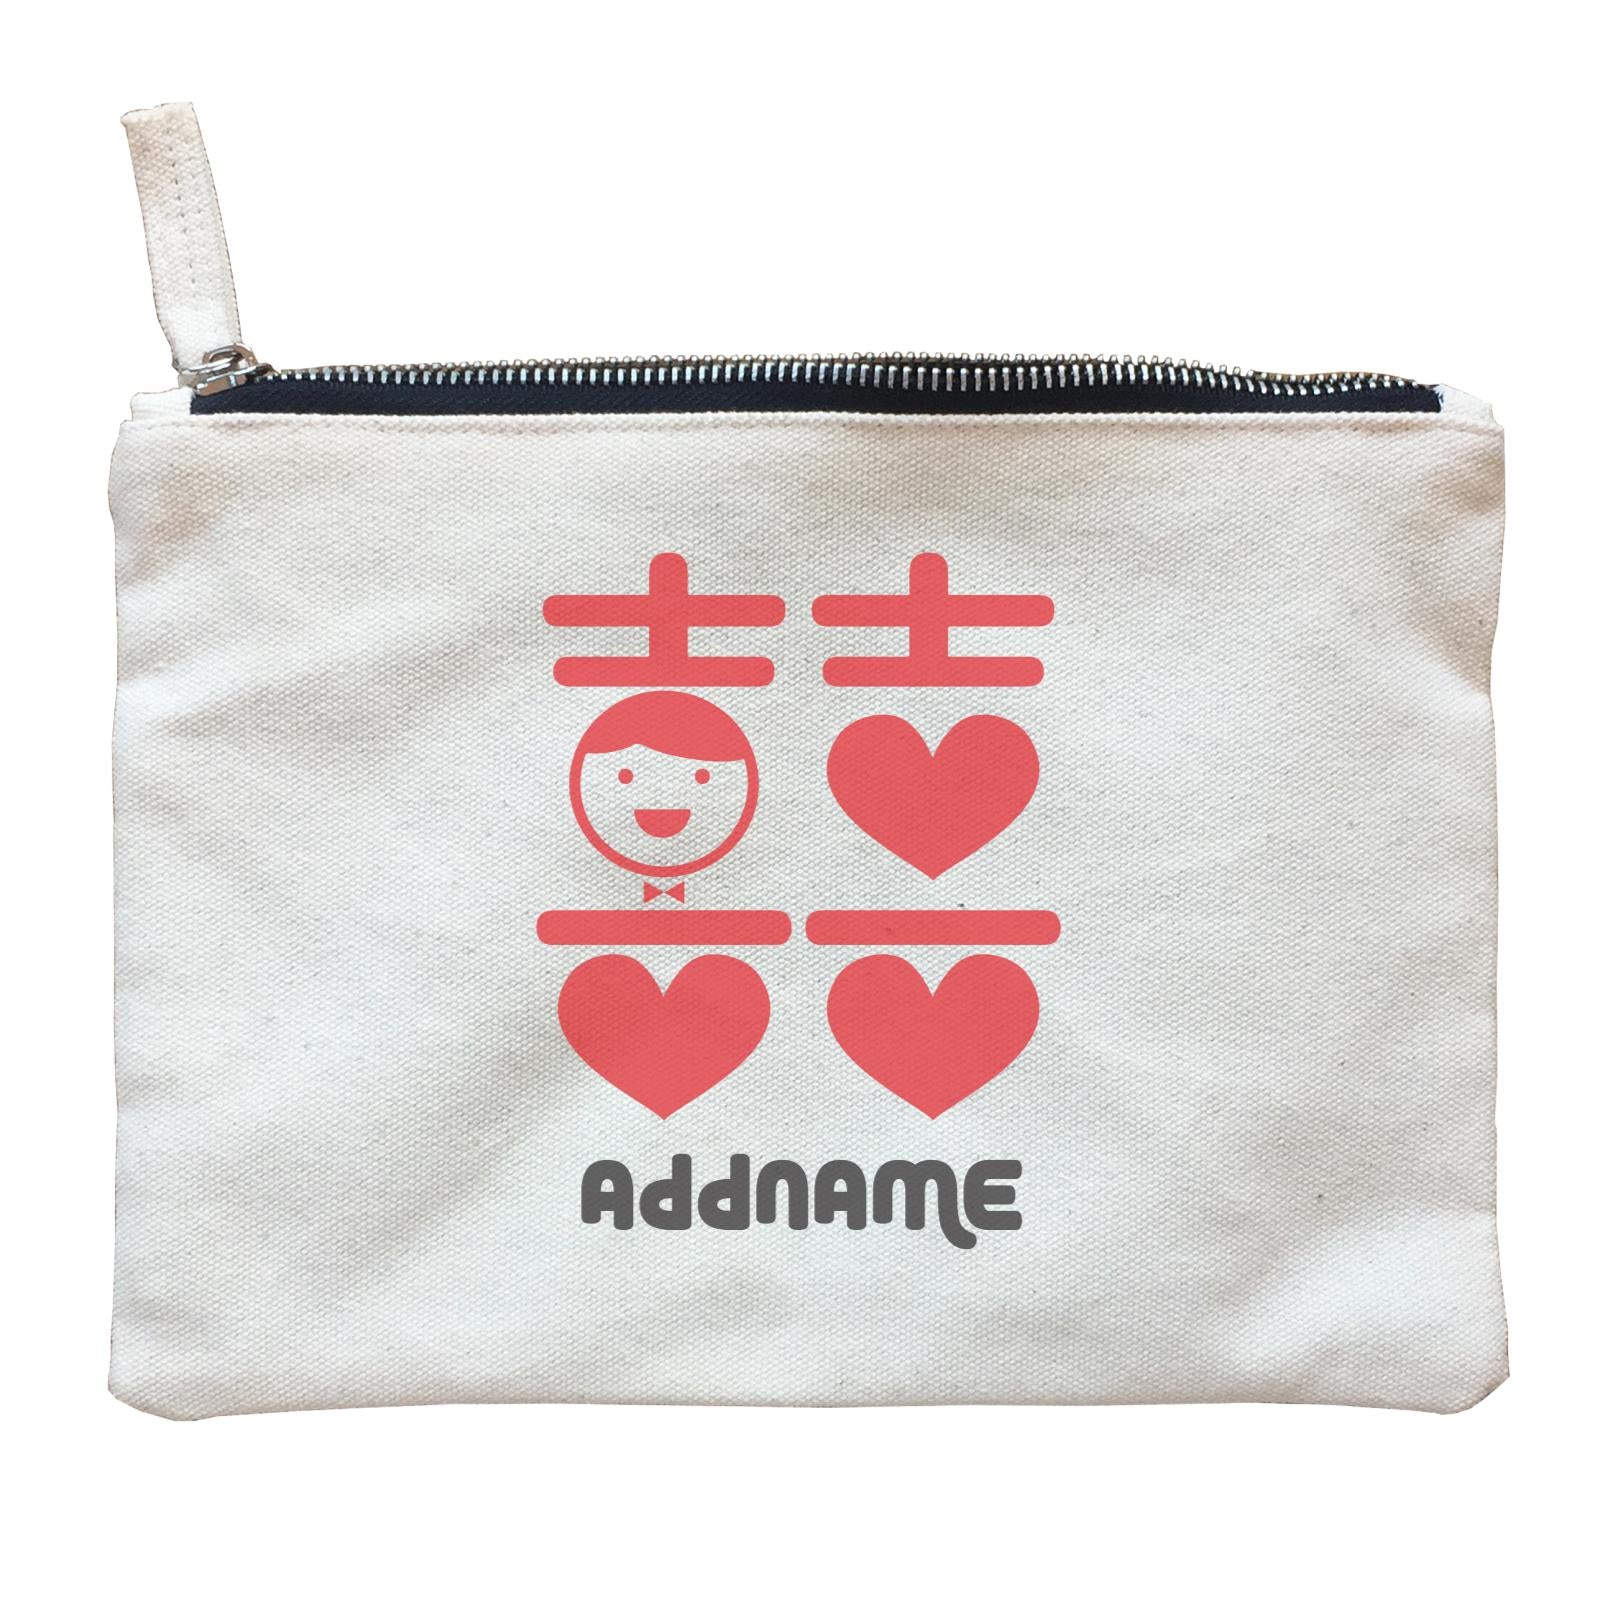 Double Happiness Wedding Groom Addname Zipper Pouch